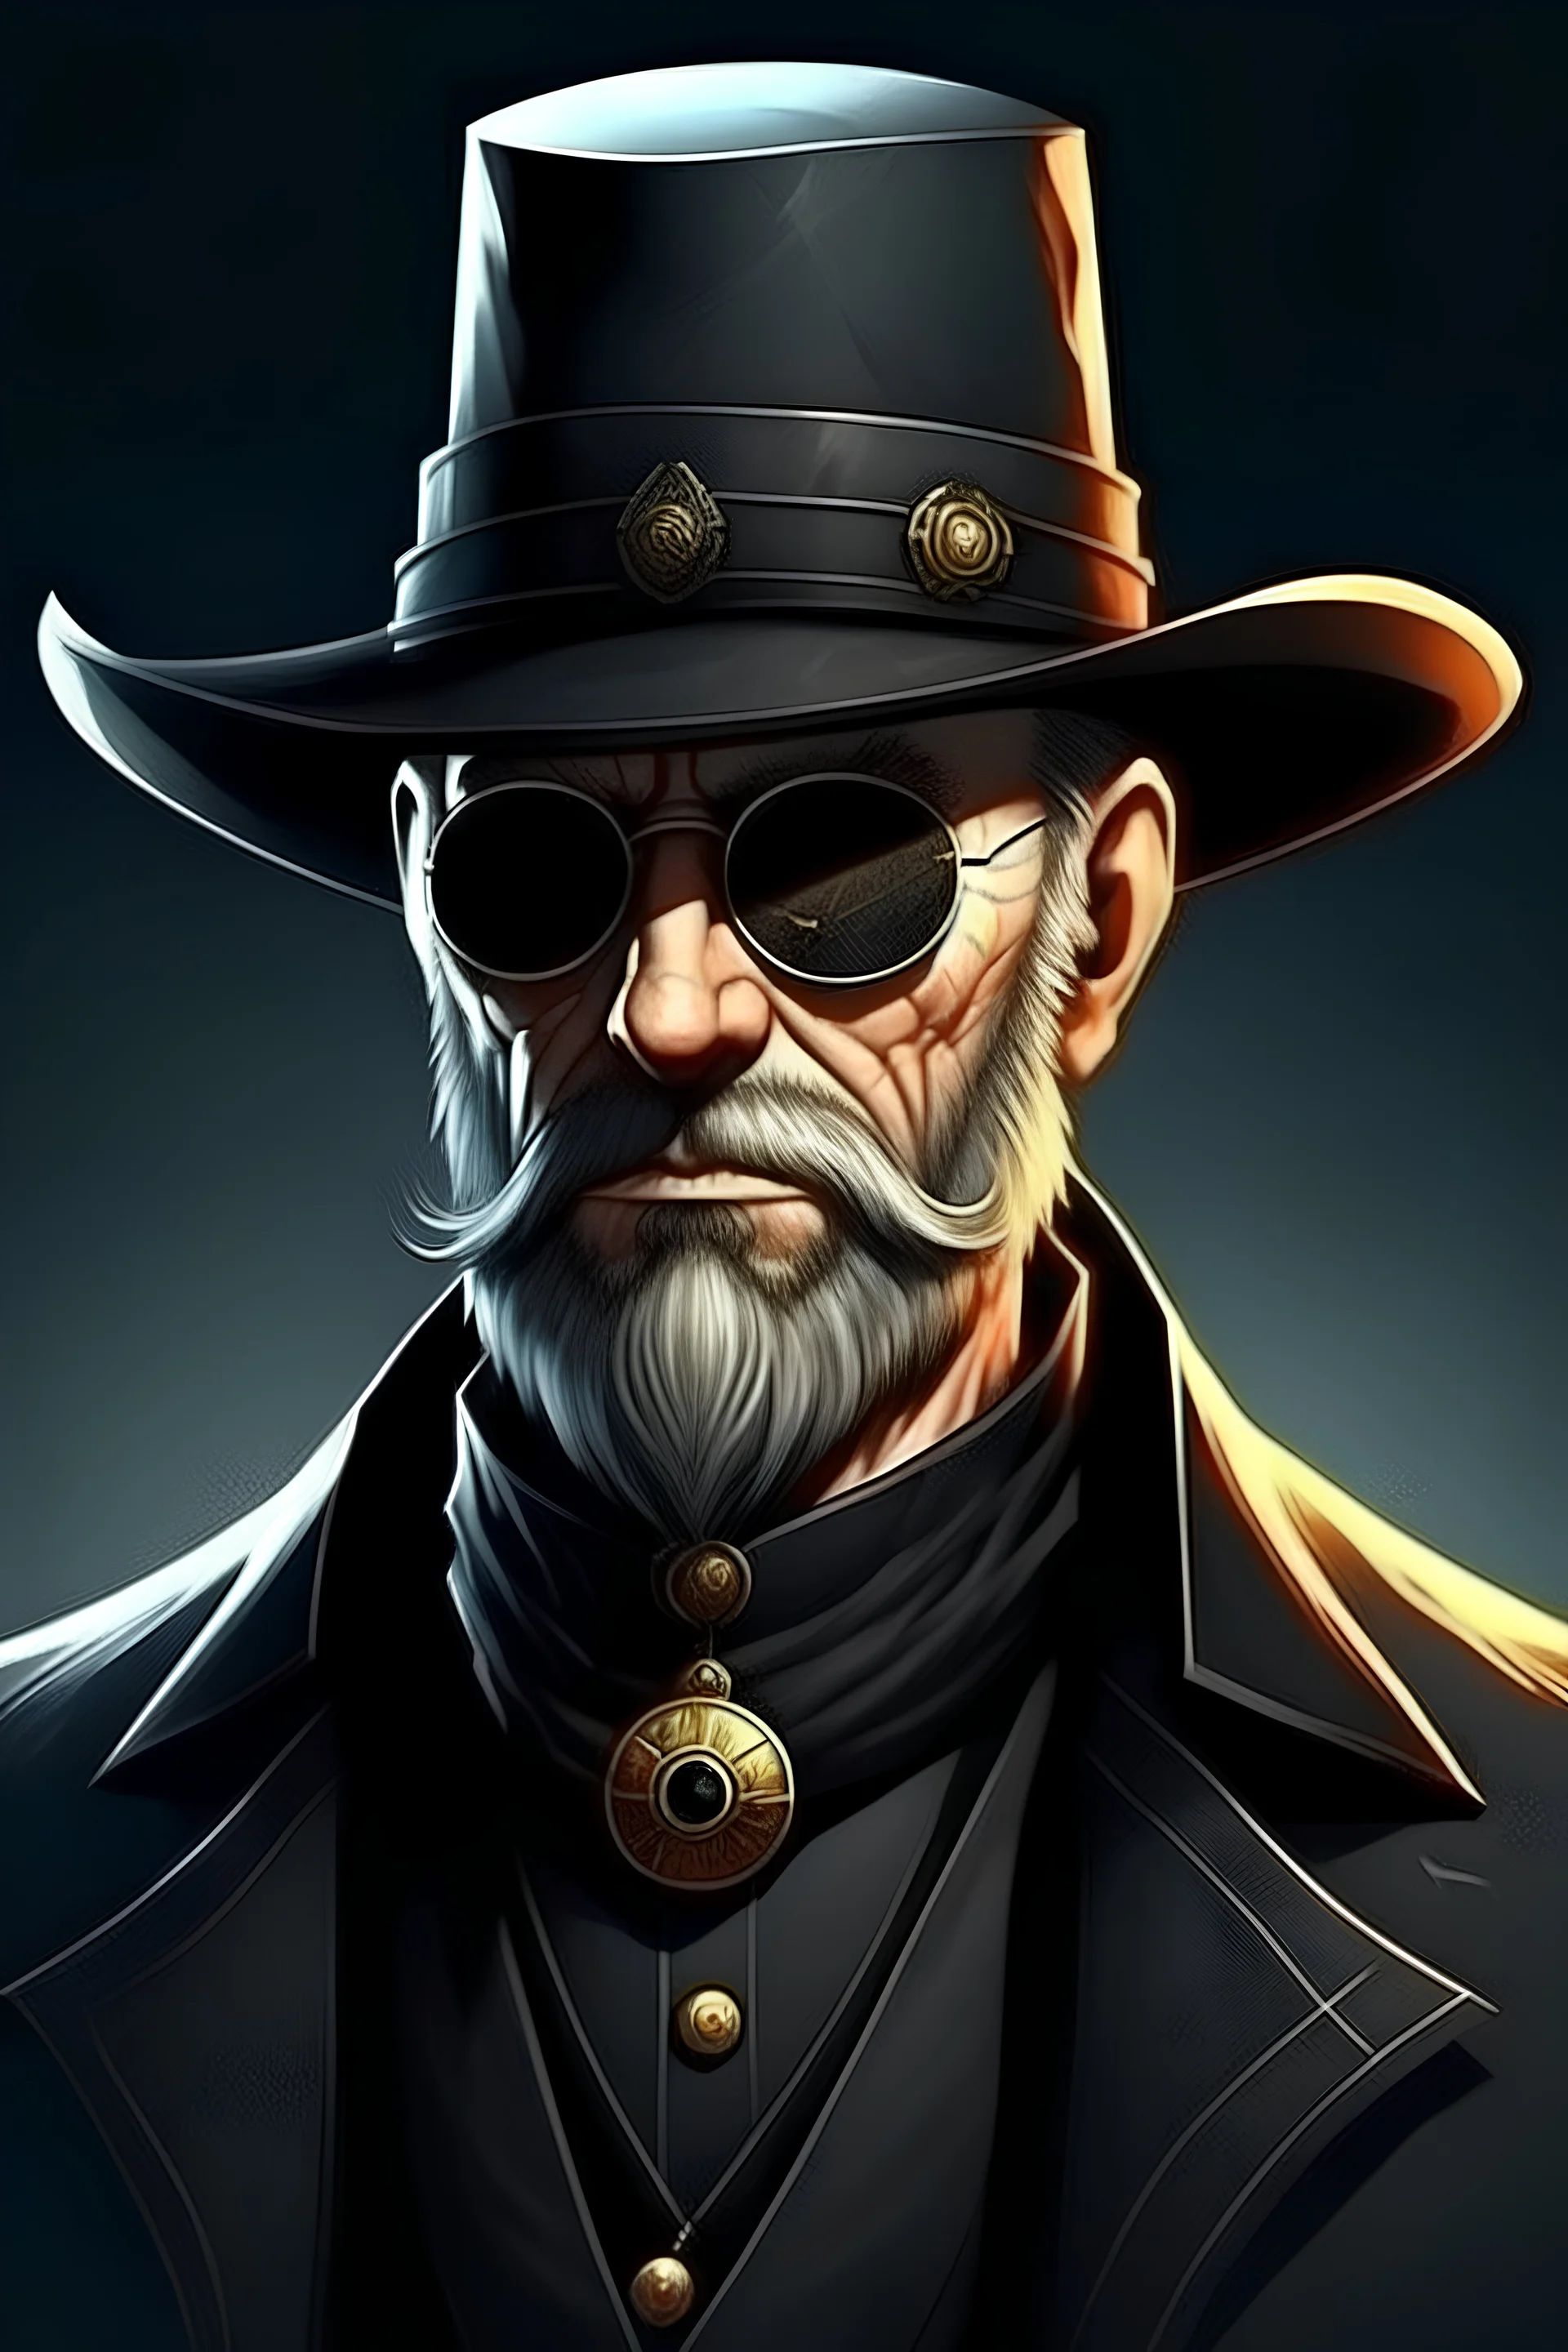 saint gunman with a round hat sunglasses and a black coat and a short black and graying beard in the wild west, grimdark realistic